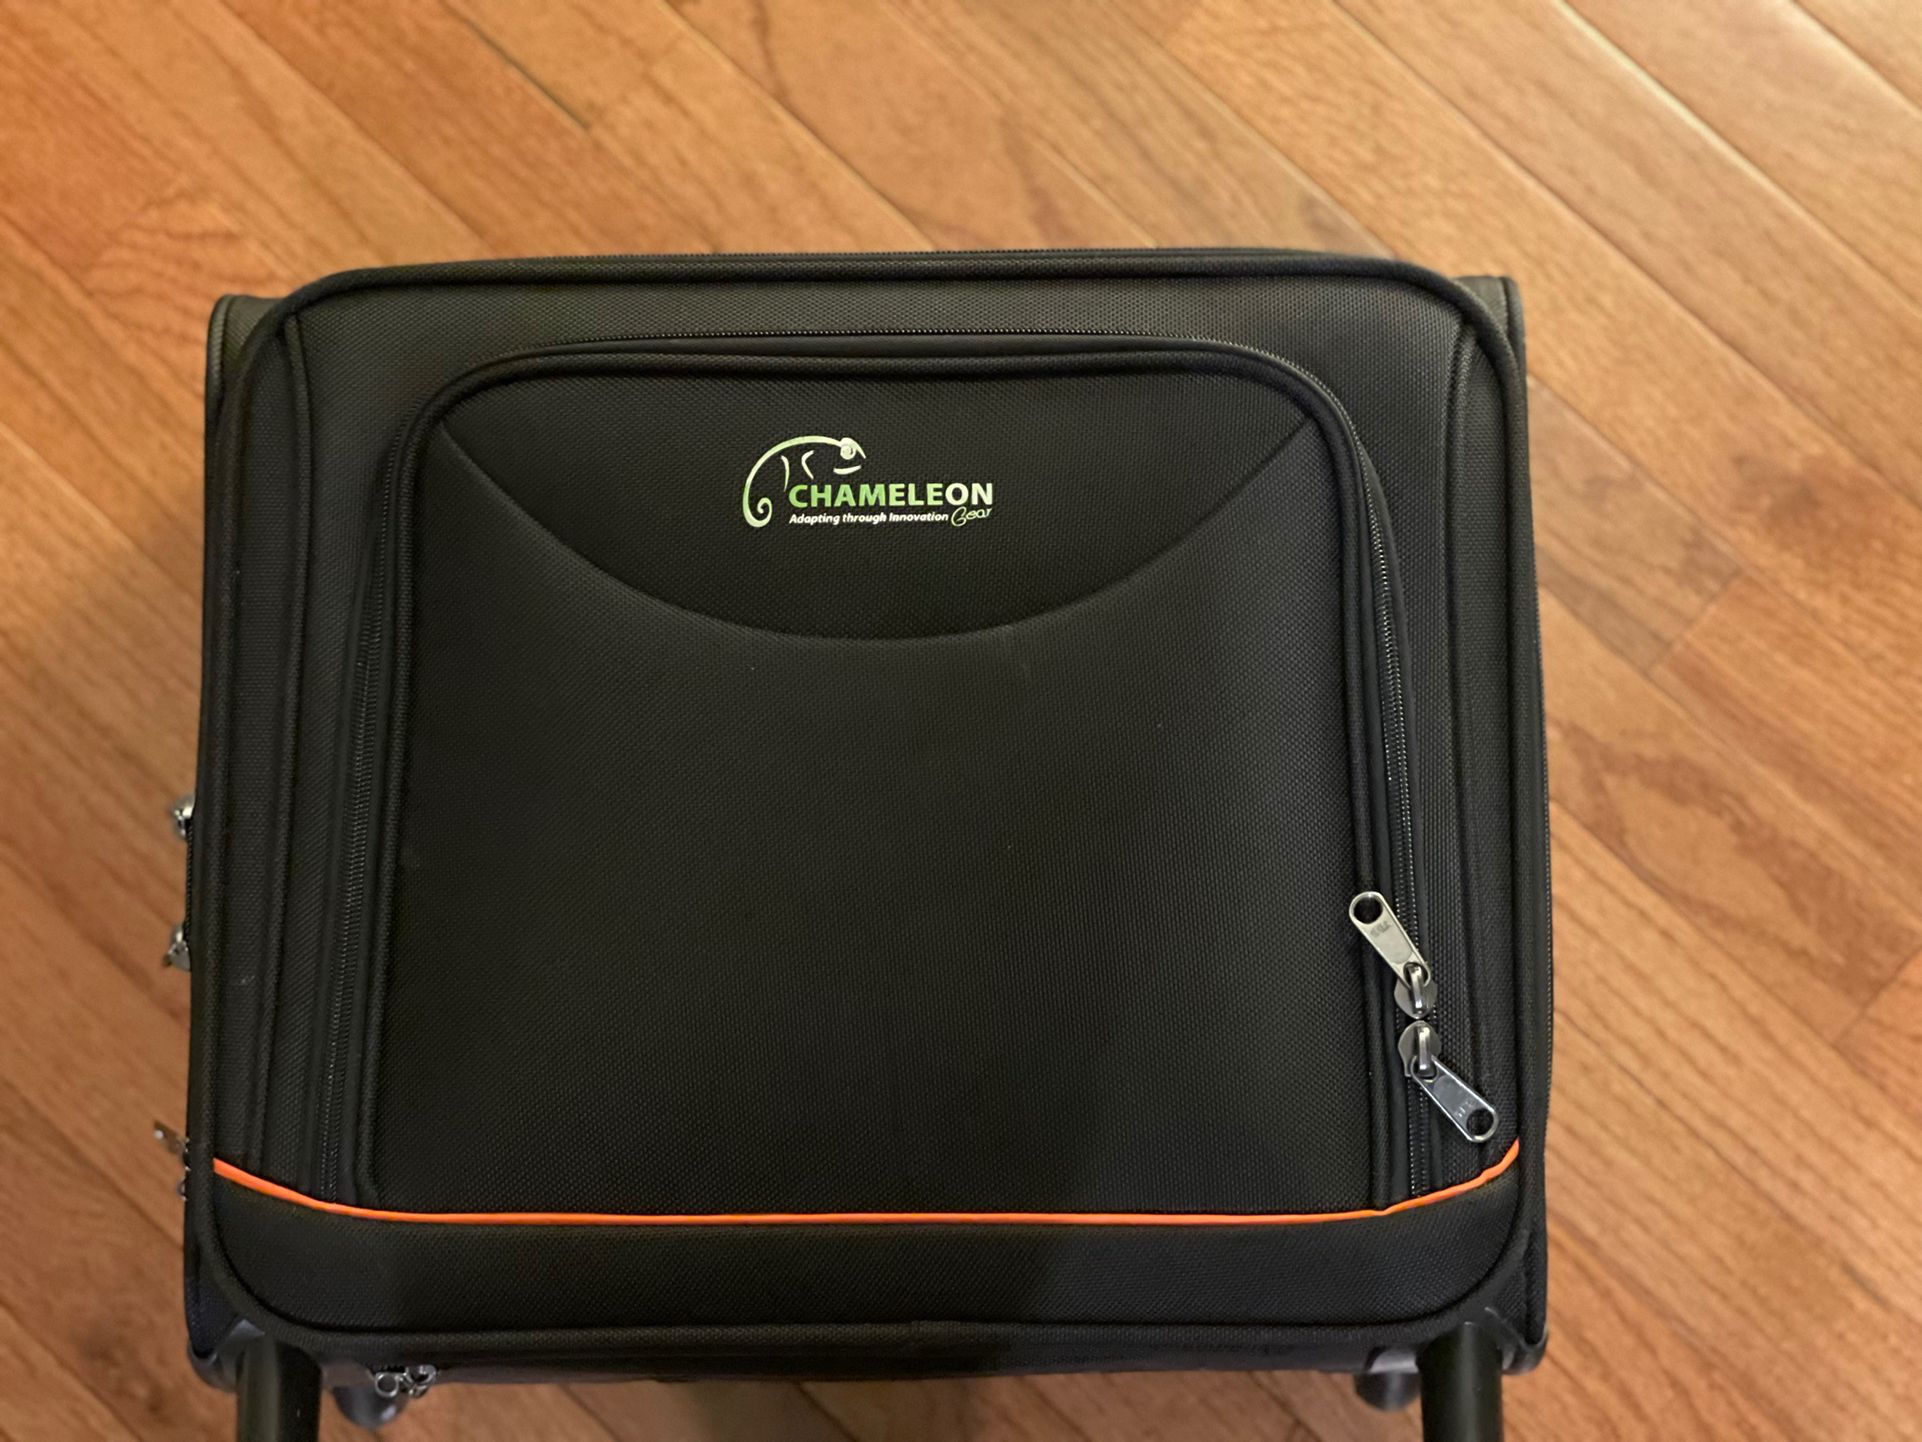 Chameleon rolling Briefcase (New, Never Used )